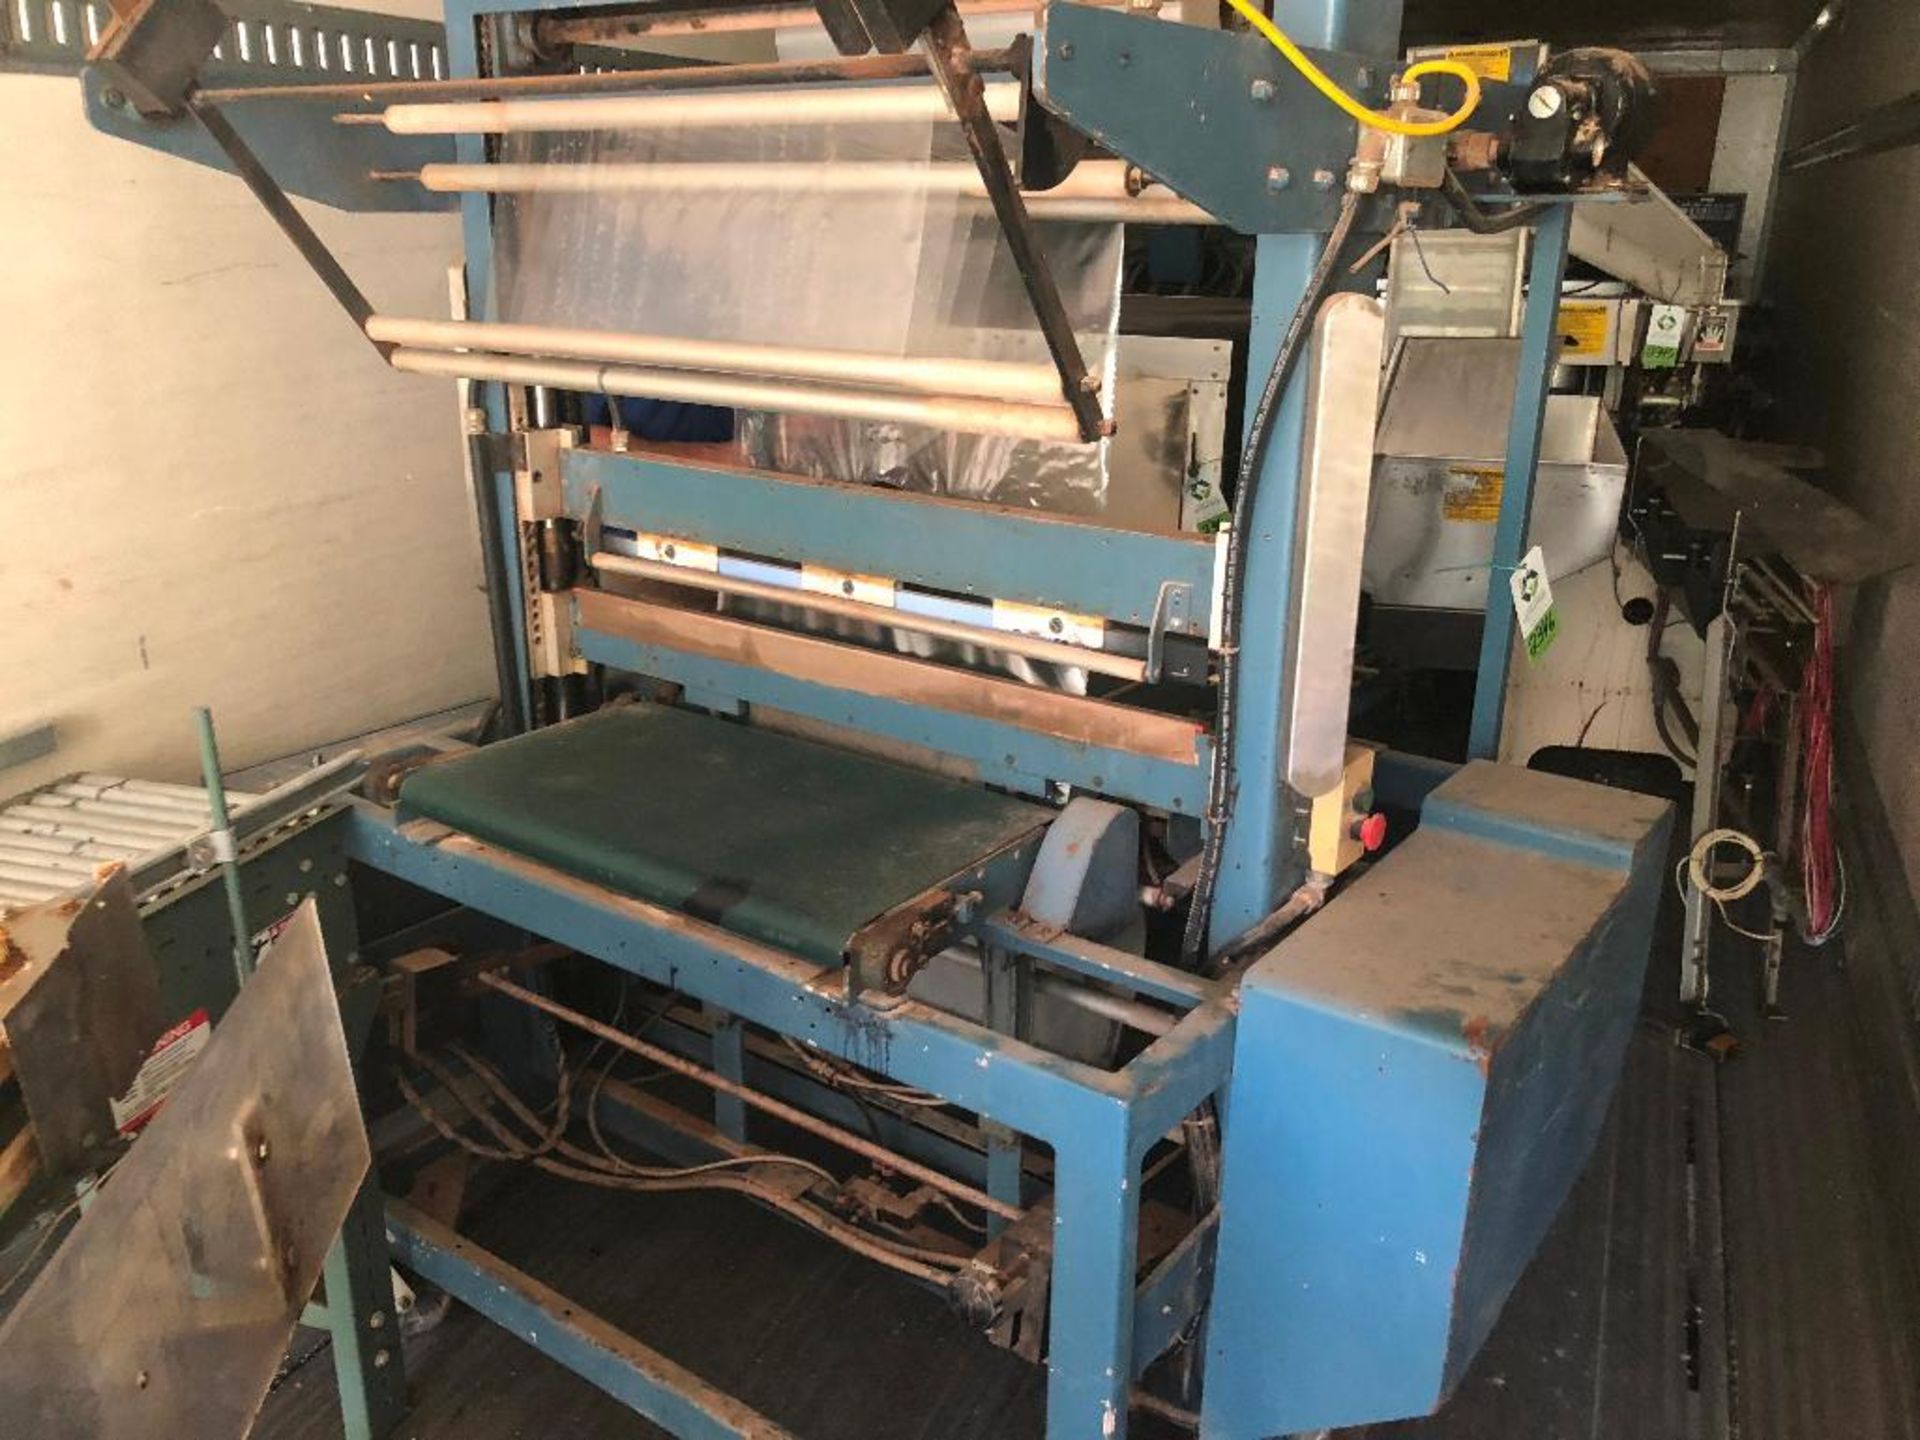 Ideal Equipment overwrapper, Model 7100, SN 2740233, 40 in. seal bar, with heat tunnel, opening 32 i